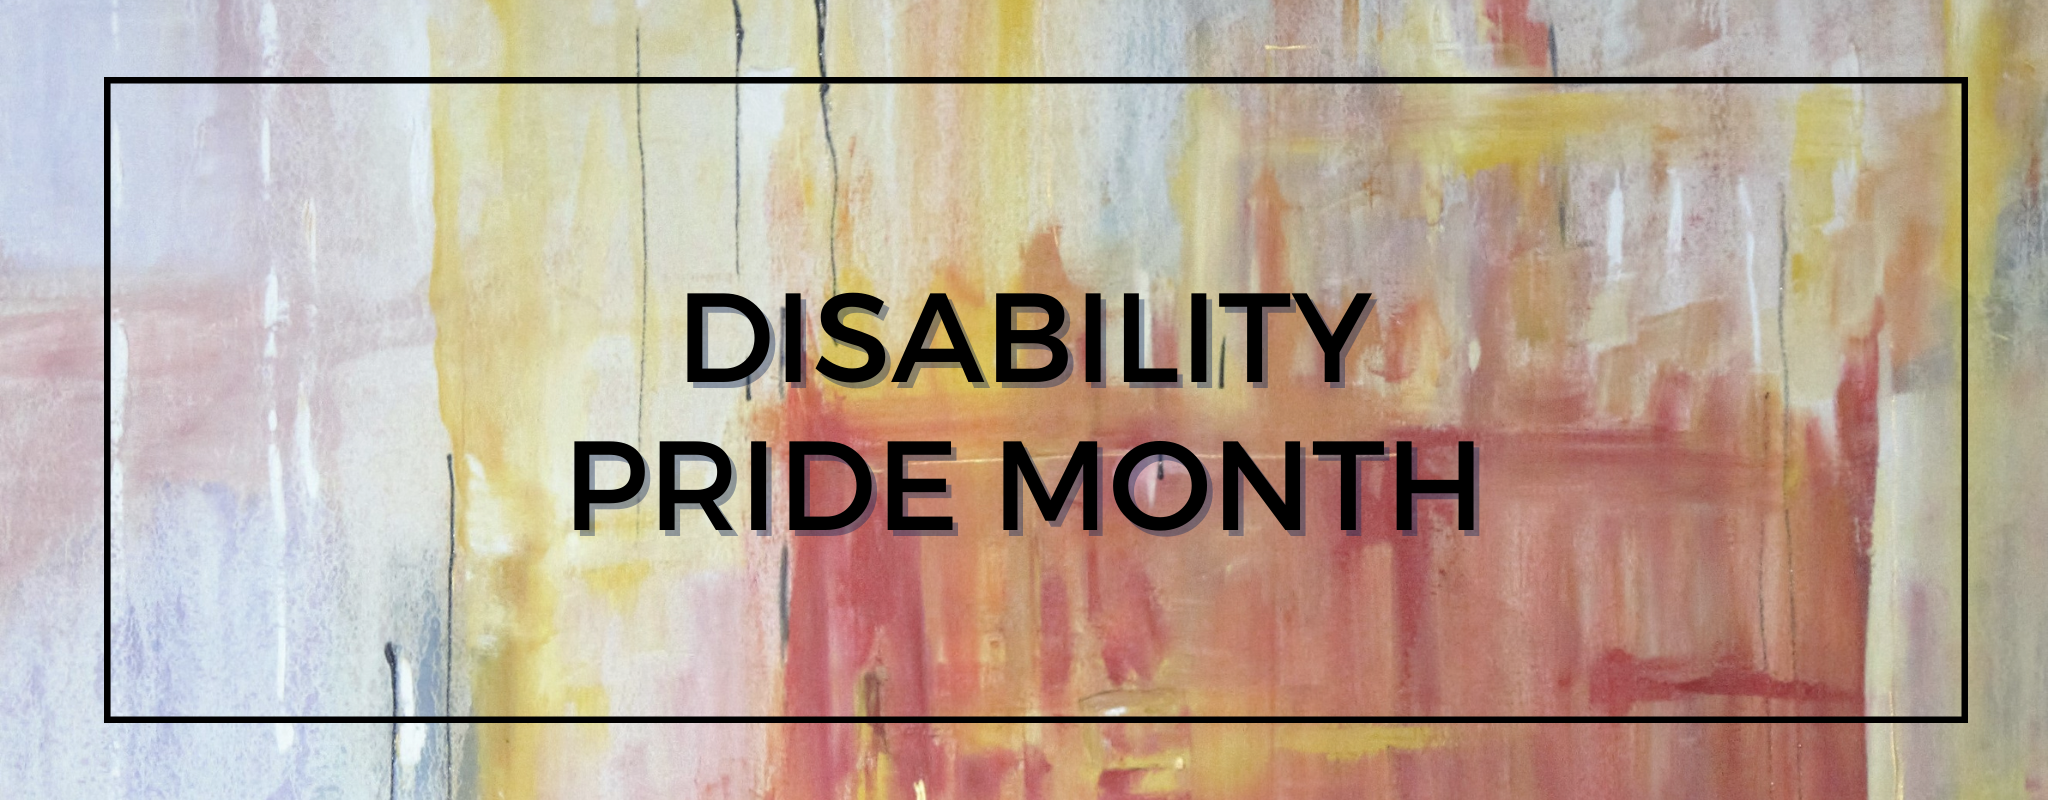 multicolored banner with the text "disability pride month" in the center of a black rectangle.